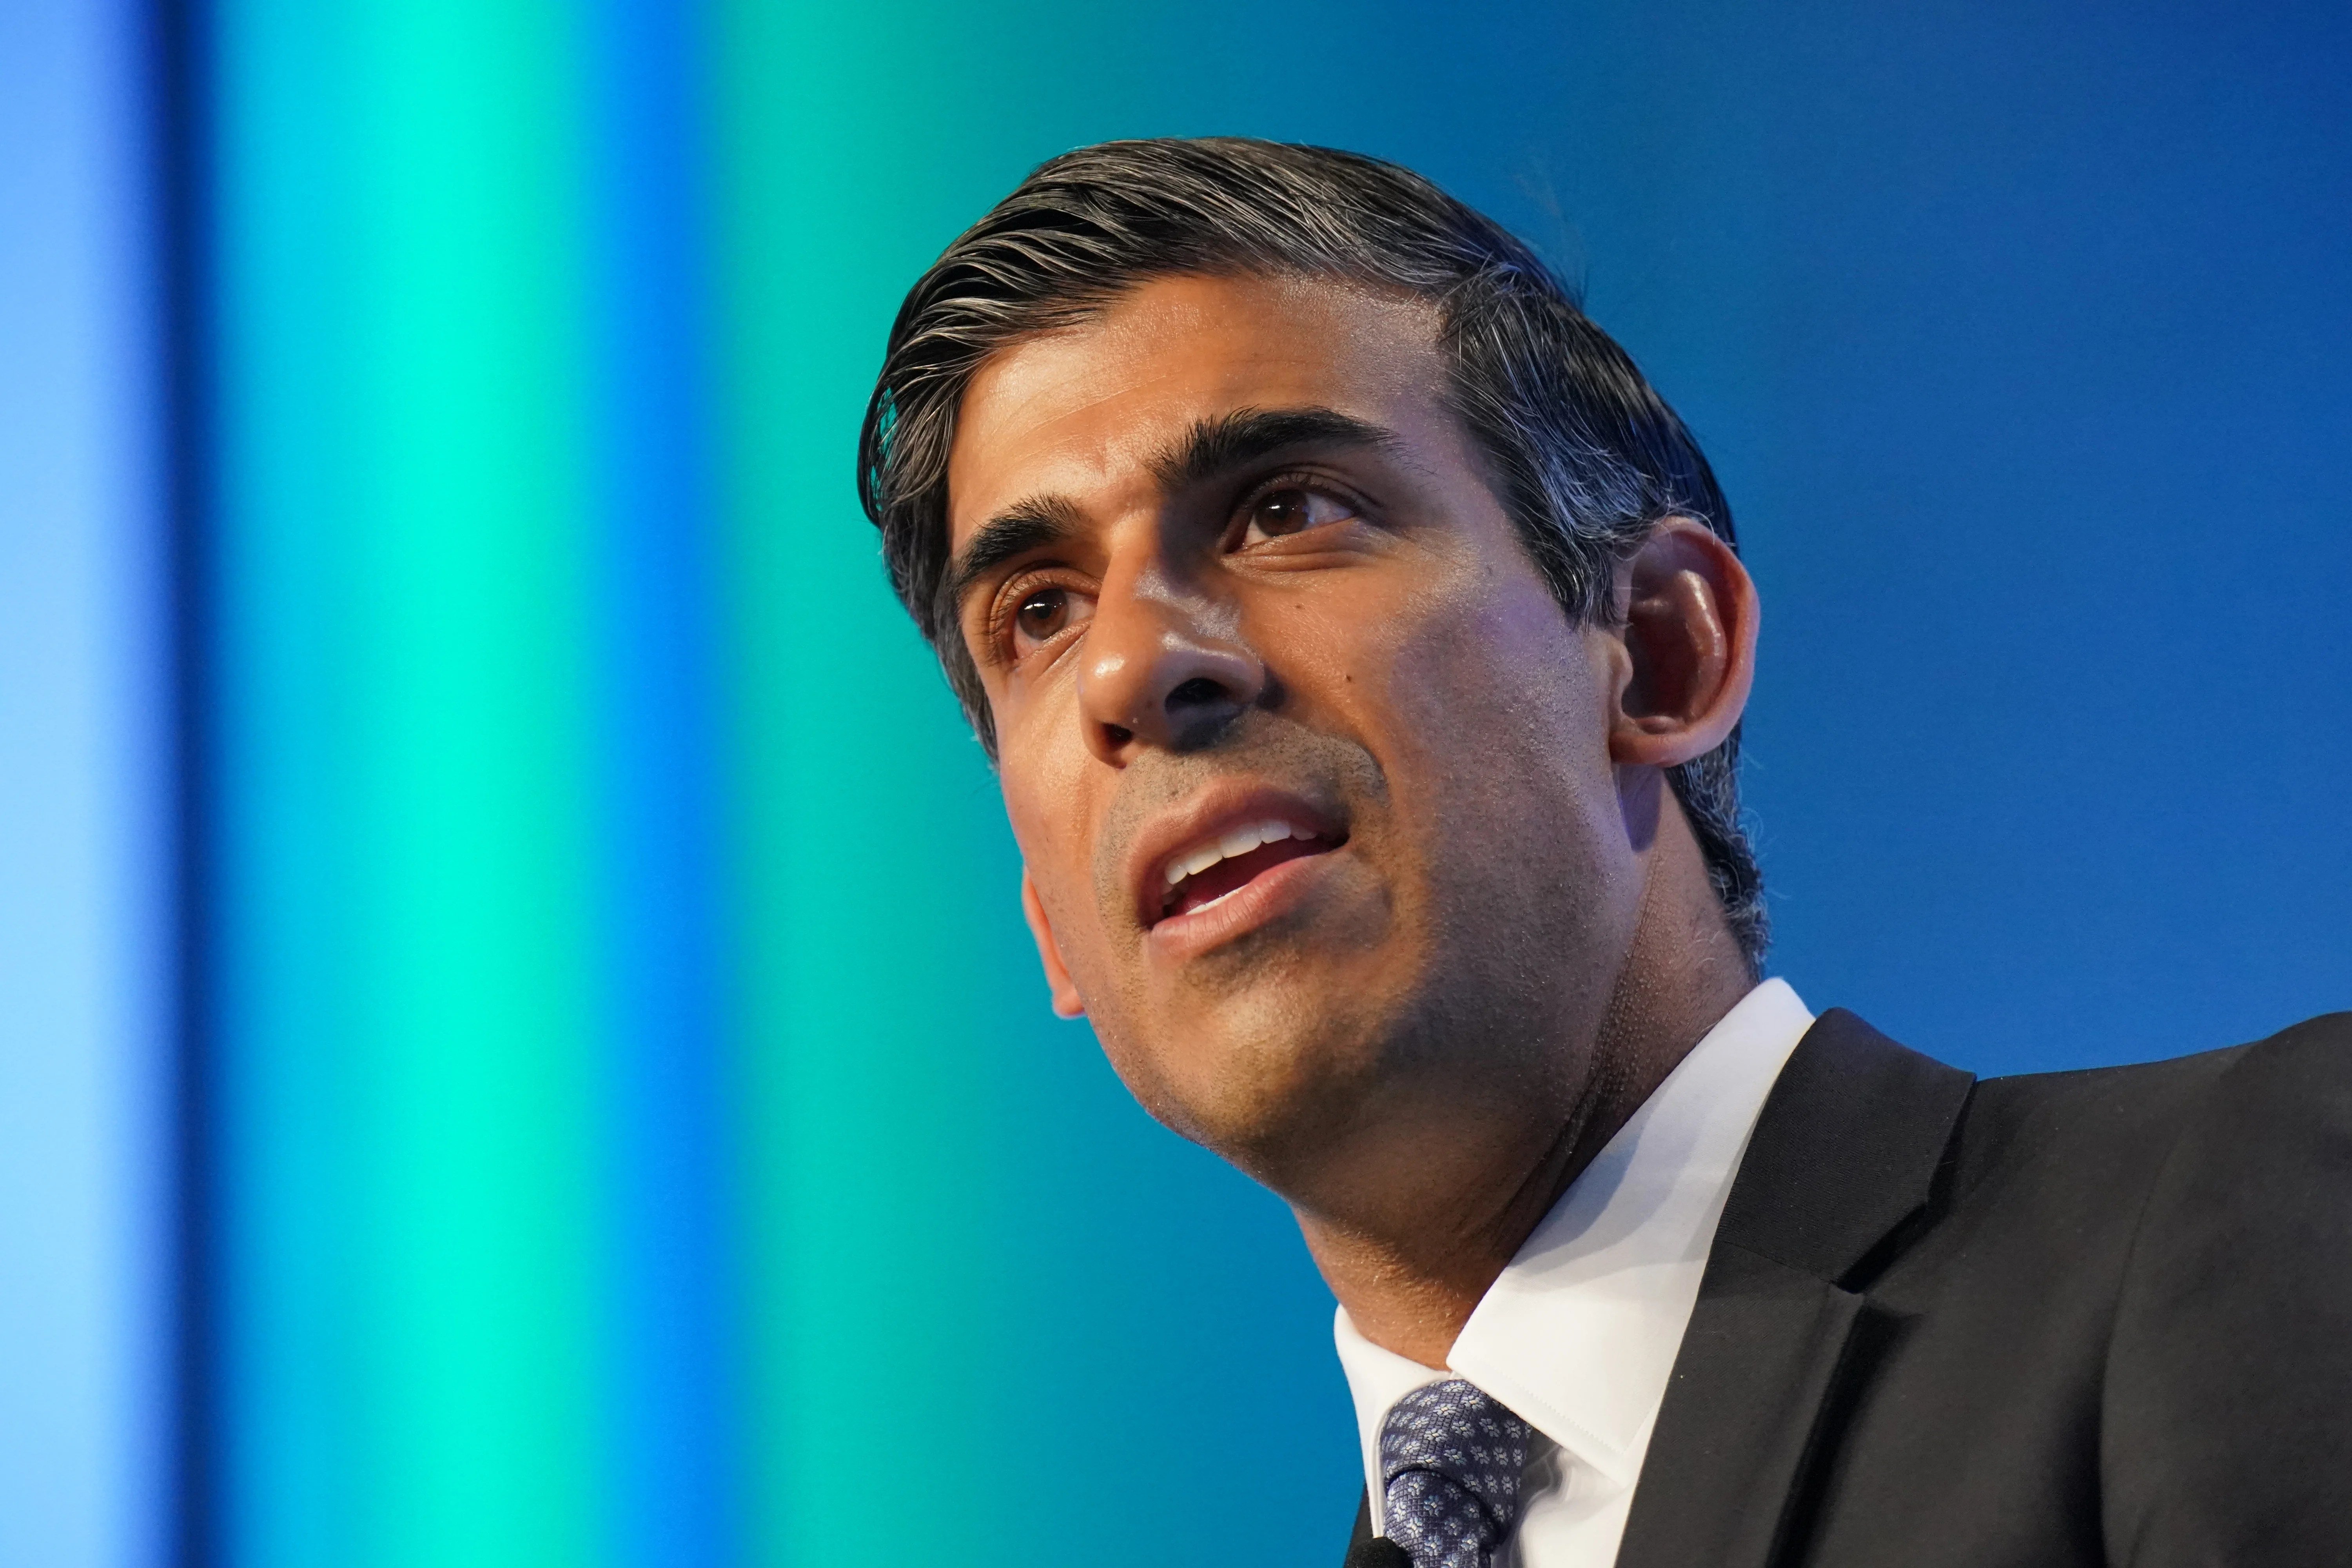 What will Rishi Sunak’s premiership mean for UK tech policy?